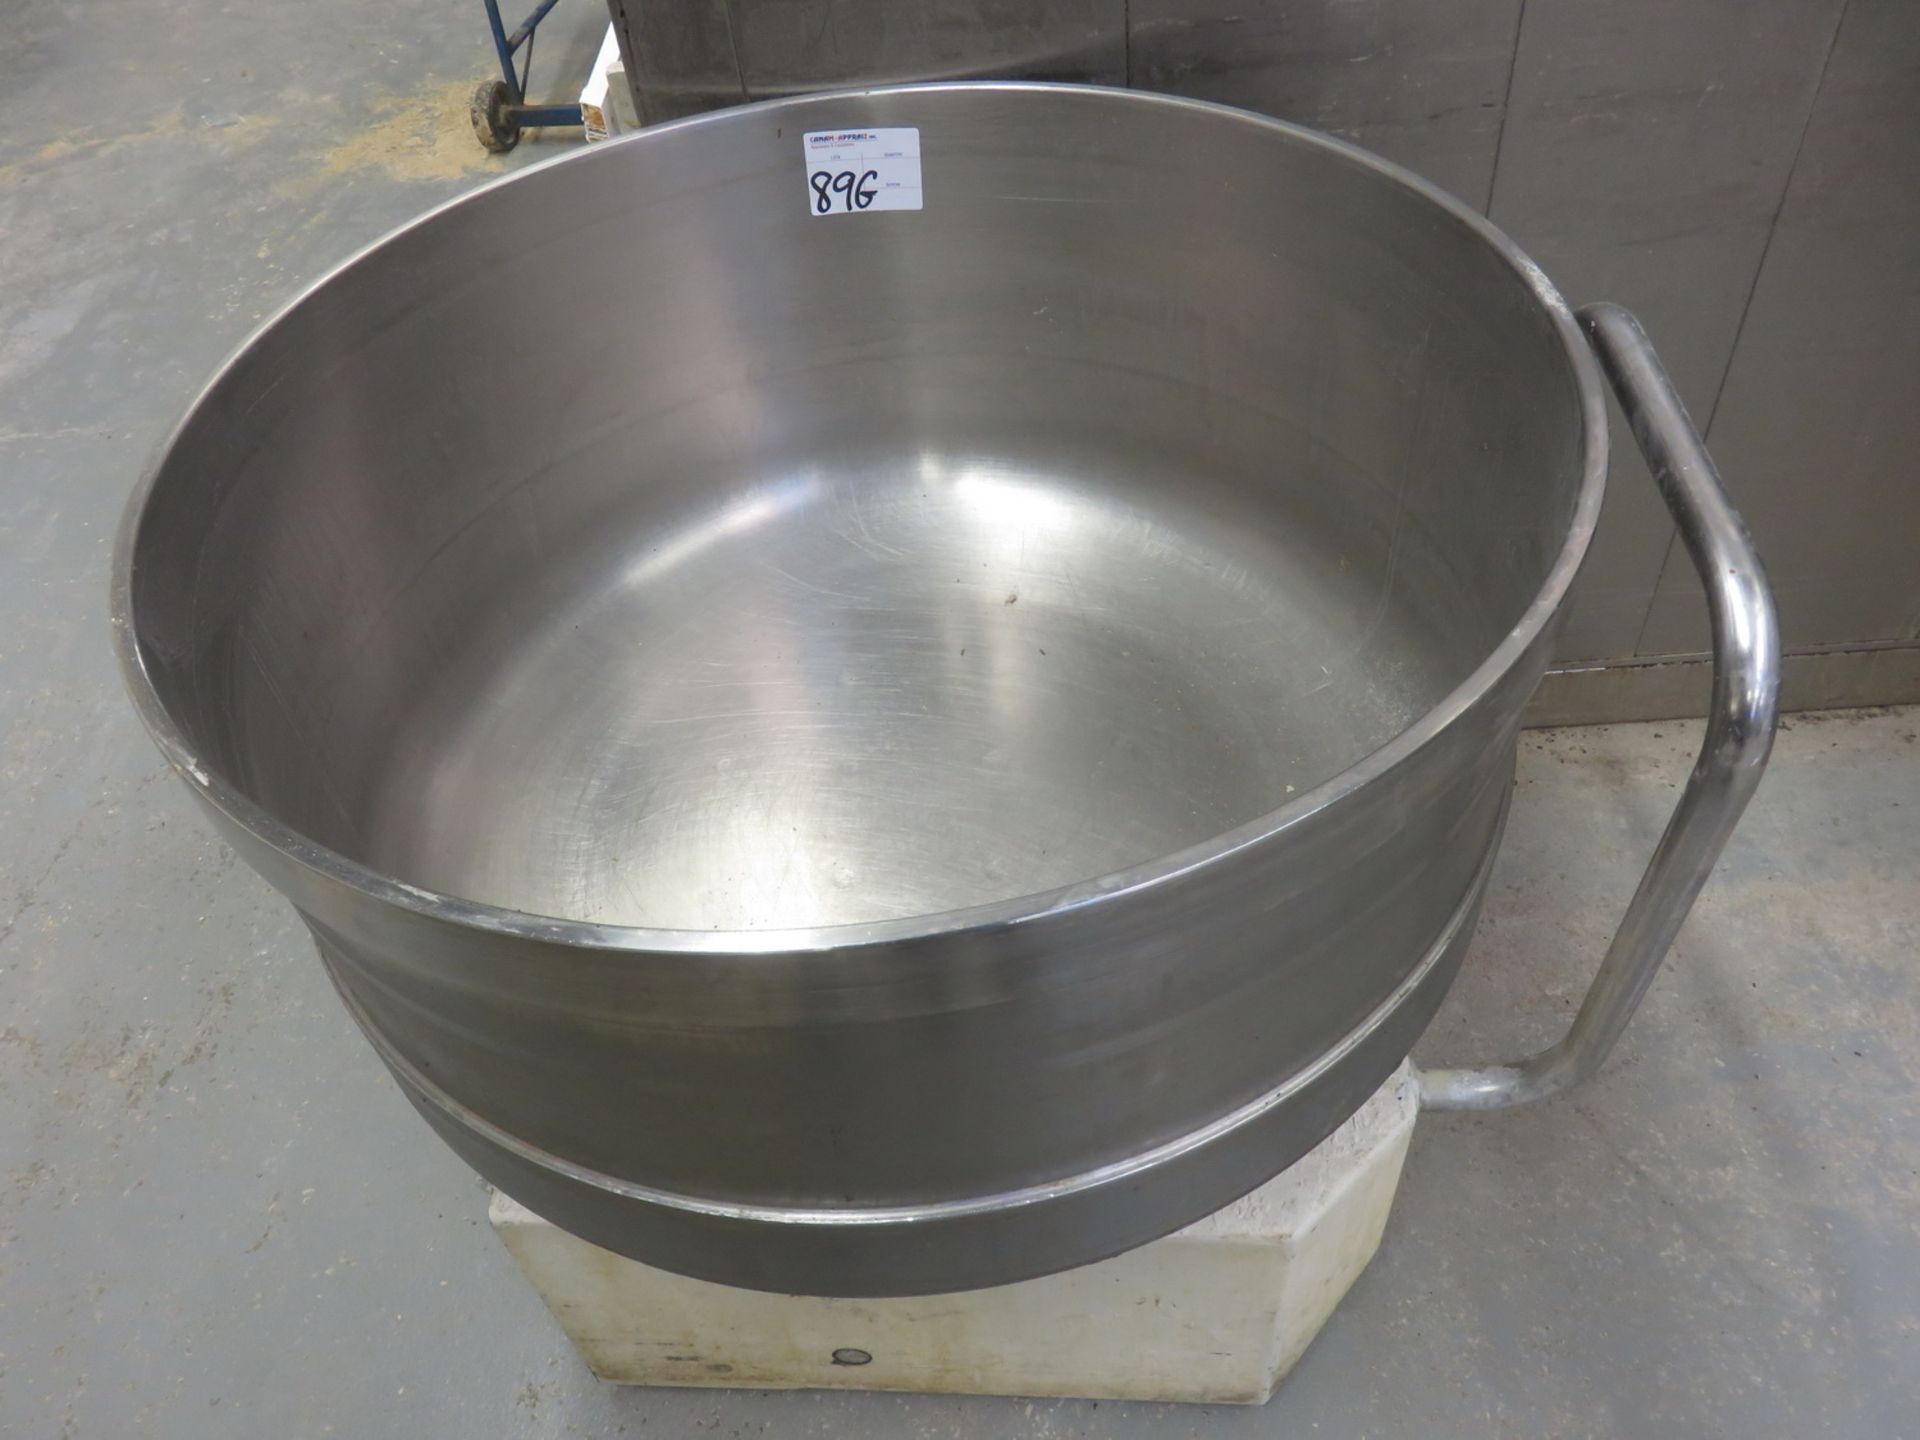 STAINLESS STEEL APPROX 36"DIA X 17"DEEP APPROX 200 - 240KG CAP SPIRAL DOUGH MIXING BOWL W/ TROLLEY